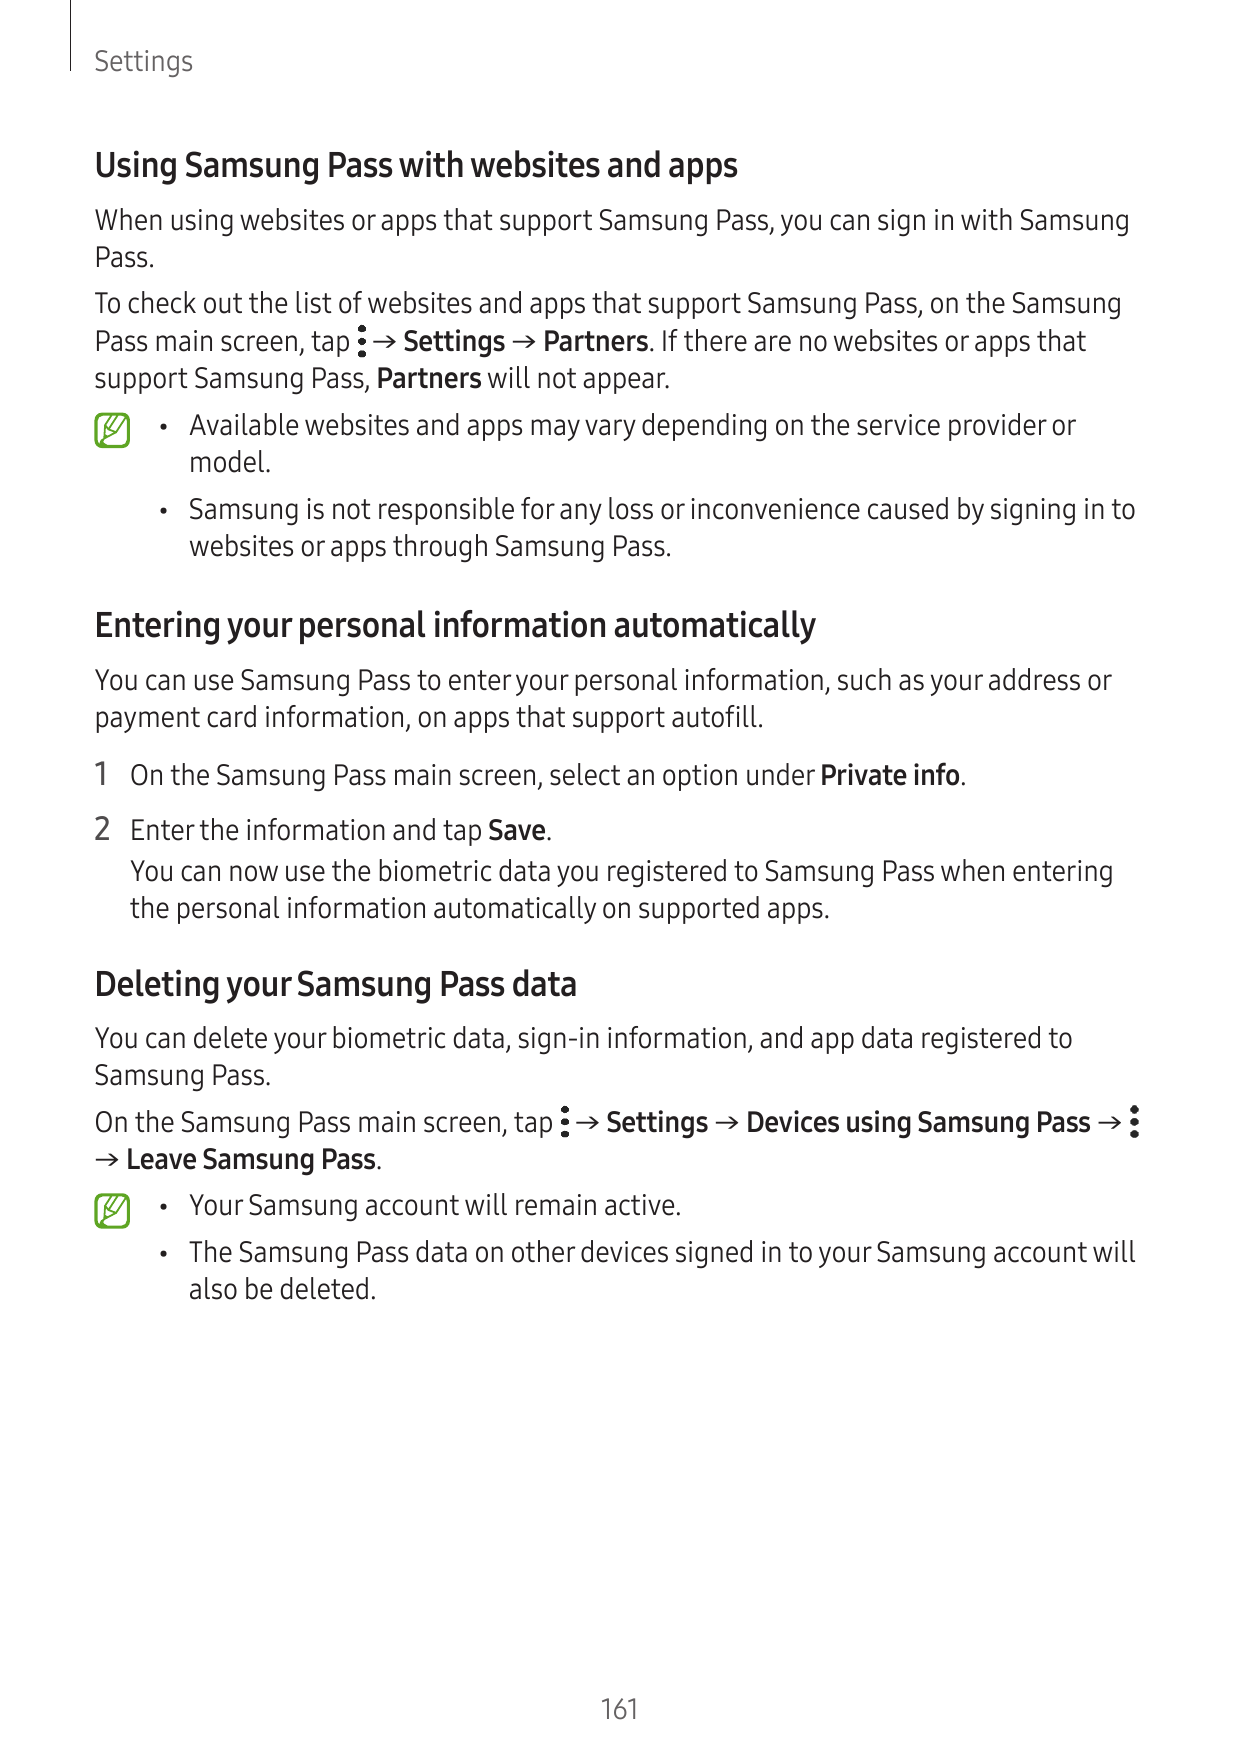 SettingsUsing Samsung Pass with websites and appsWhen using websites or apps that support Samsung Pass, you can sign in with Sam